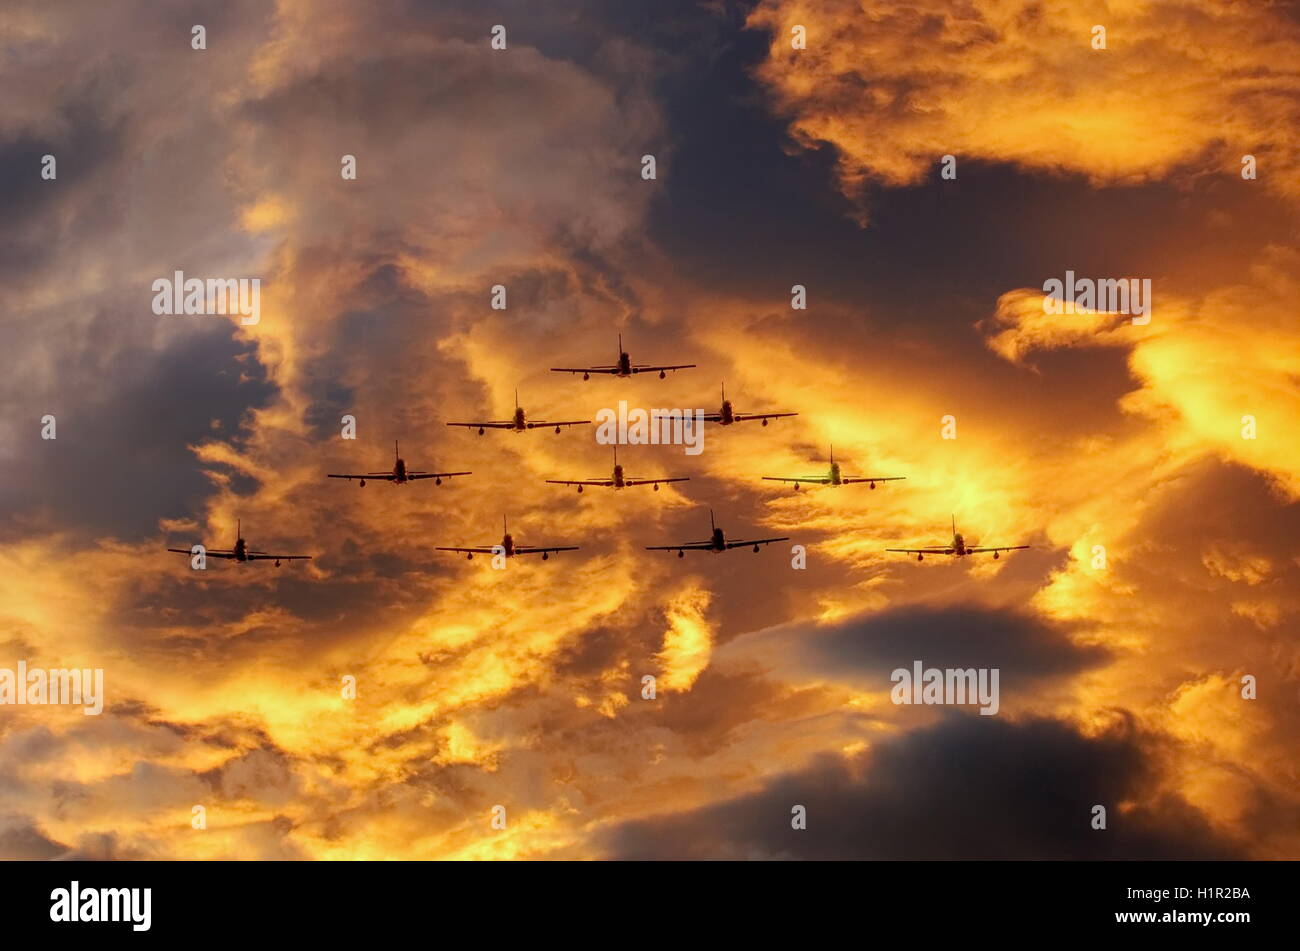 airplanes in formation with dramatic cloudy sky Stock Photo